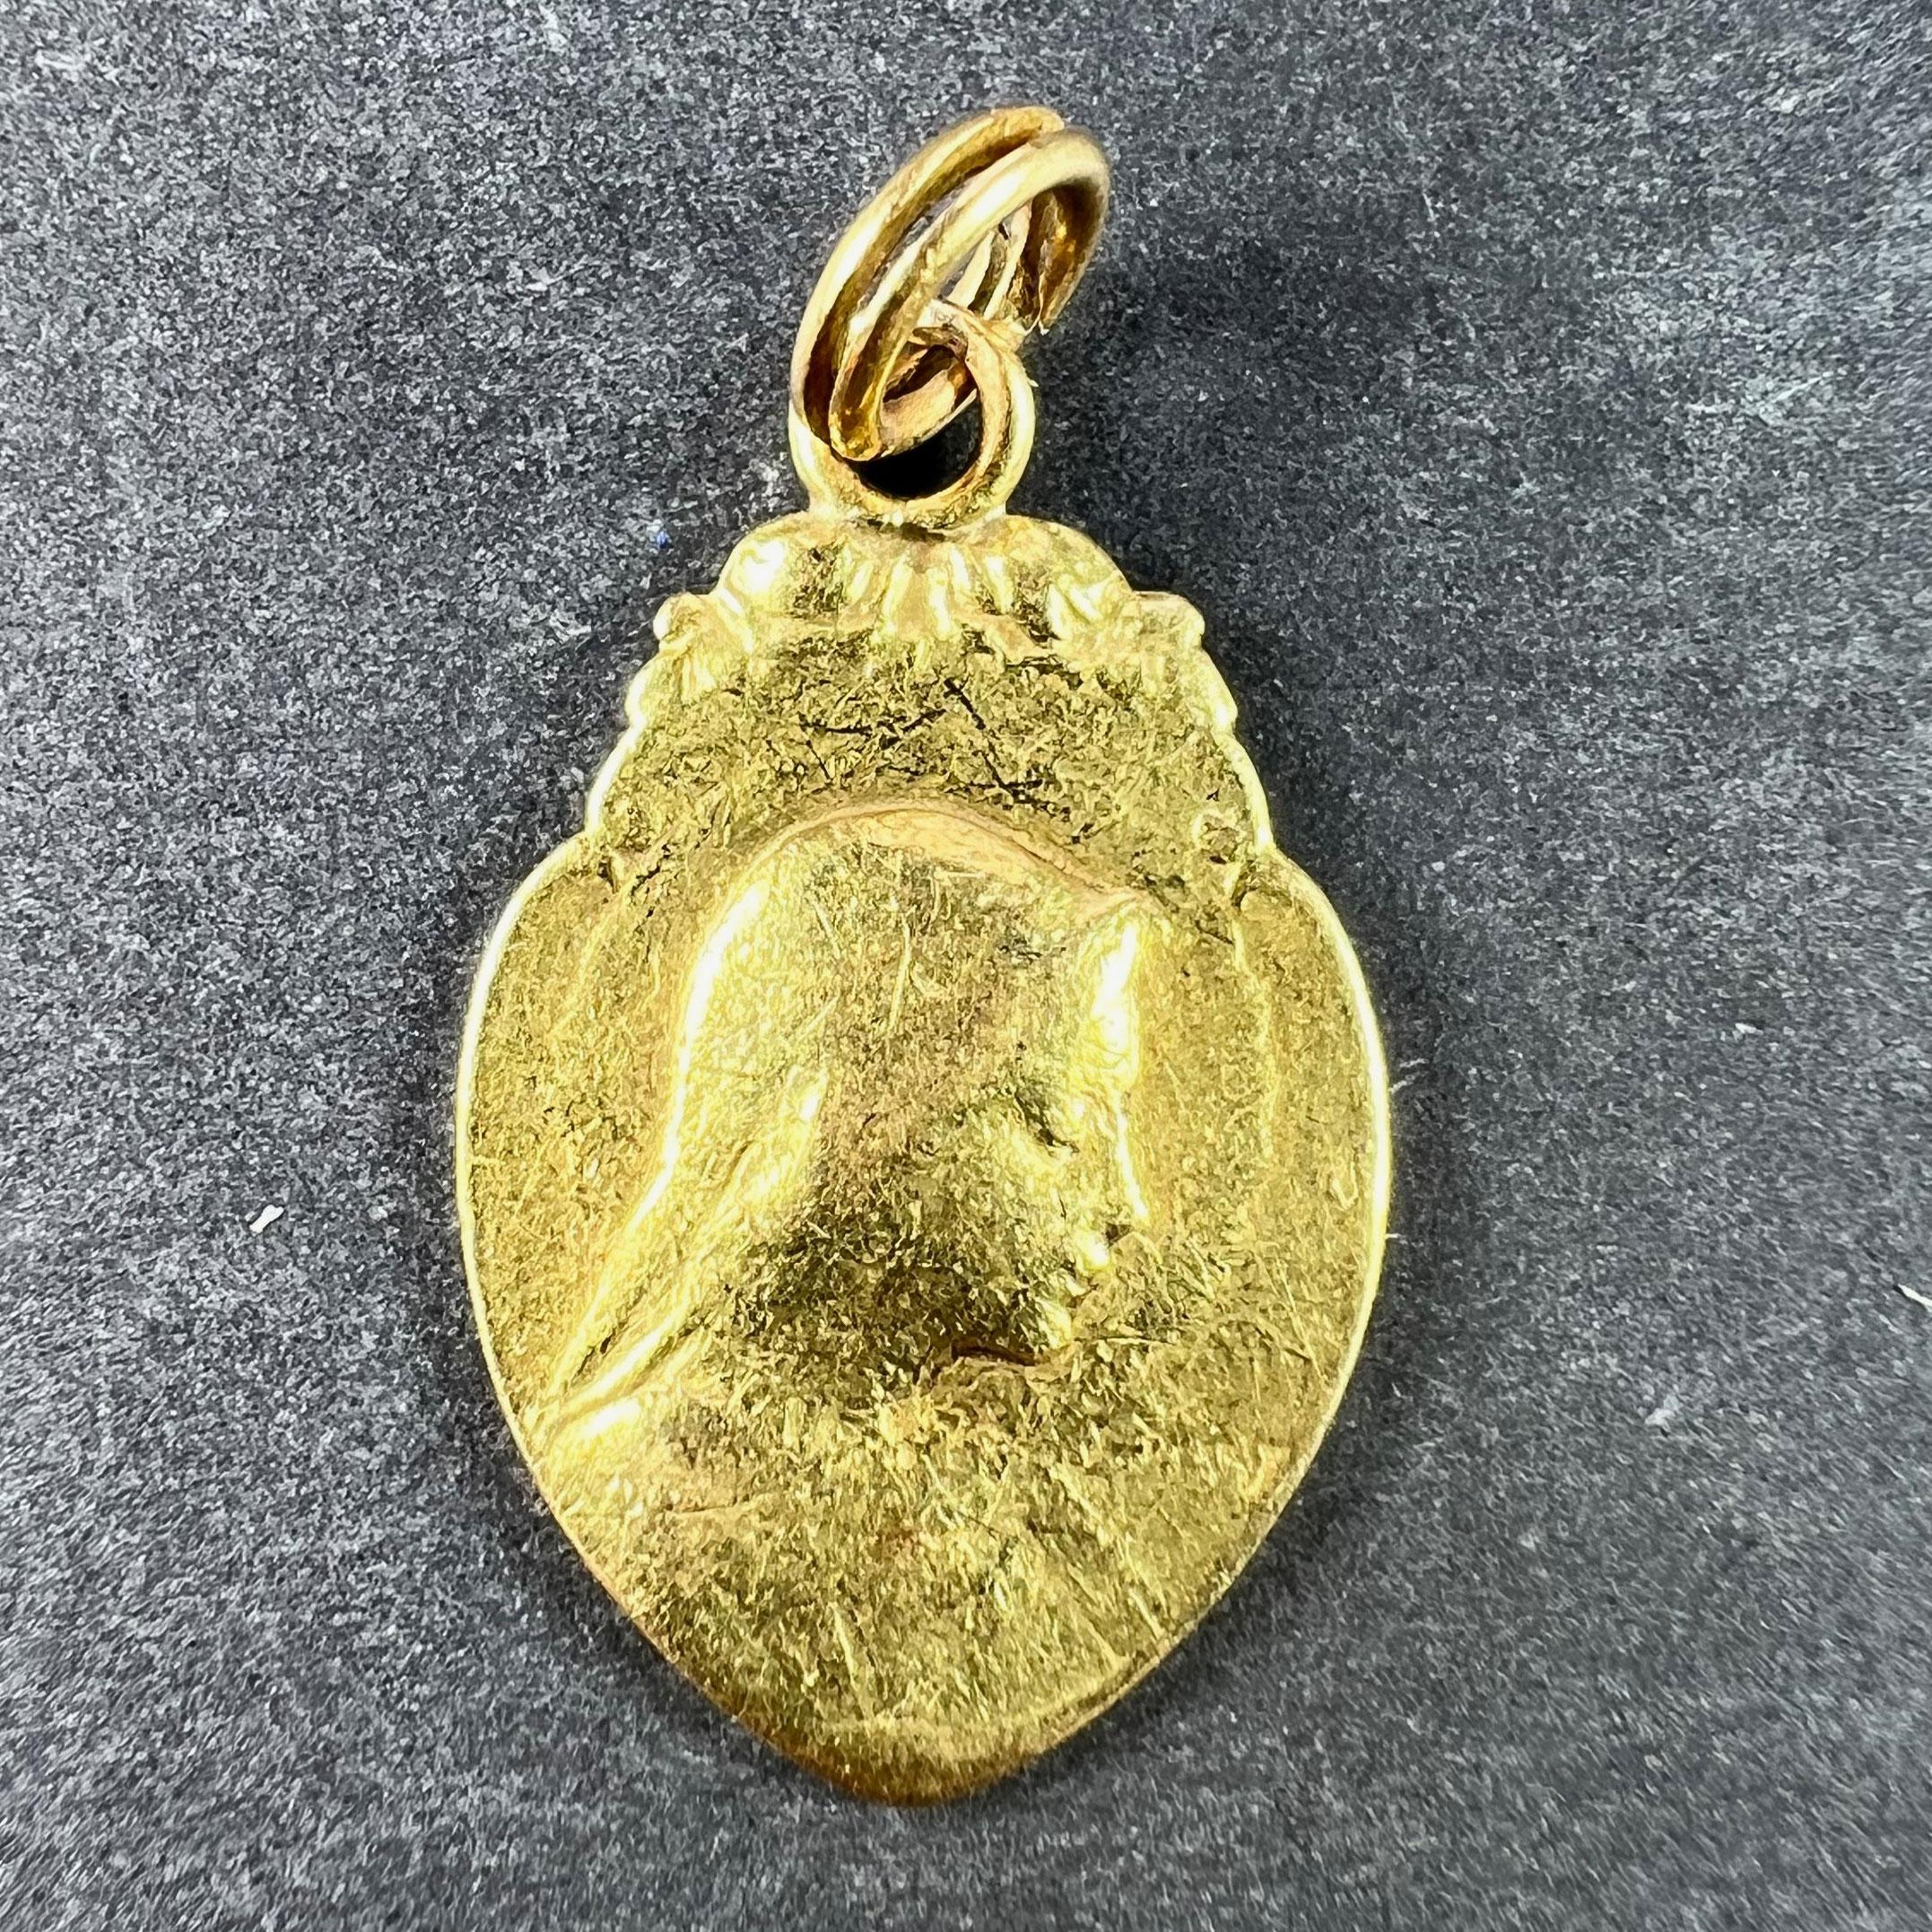 A French 18 karat (18K) yellow gold charm pendant designed as a shield-shaped medal depicting the Virgin Mary backed by a halo and surmounted by roses; engraved with a monogram for CS to the reverse and dated 1er Octobre 1932. Stamped with the